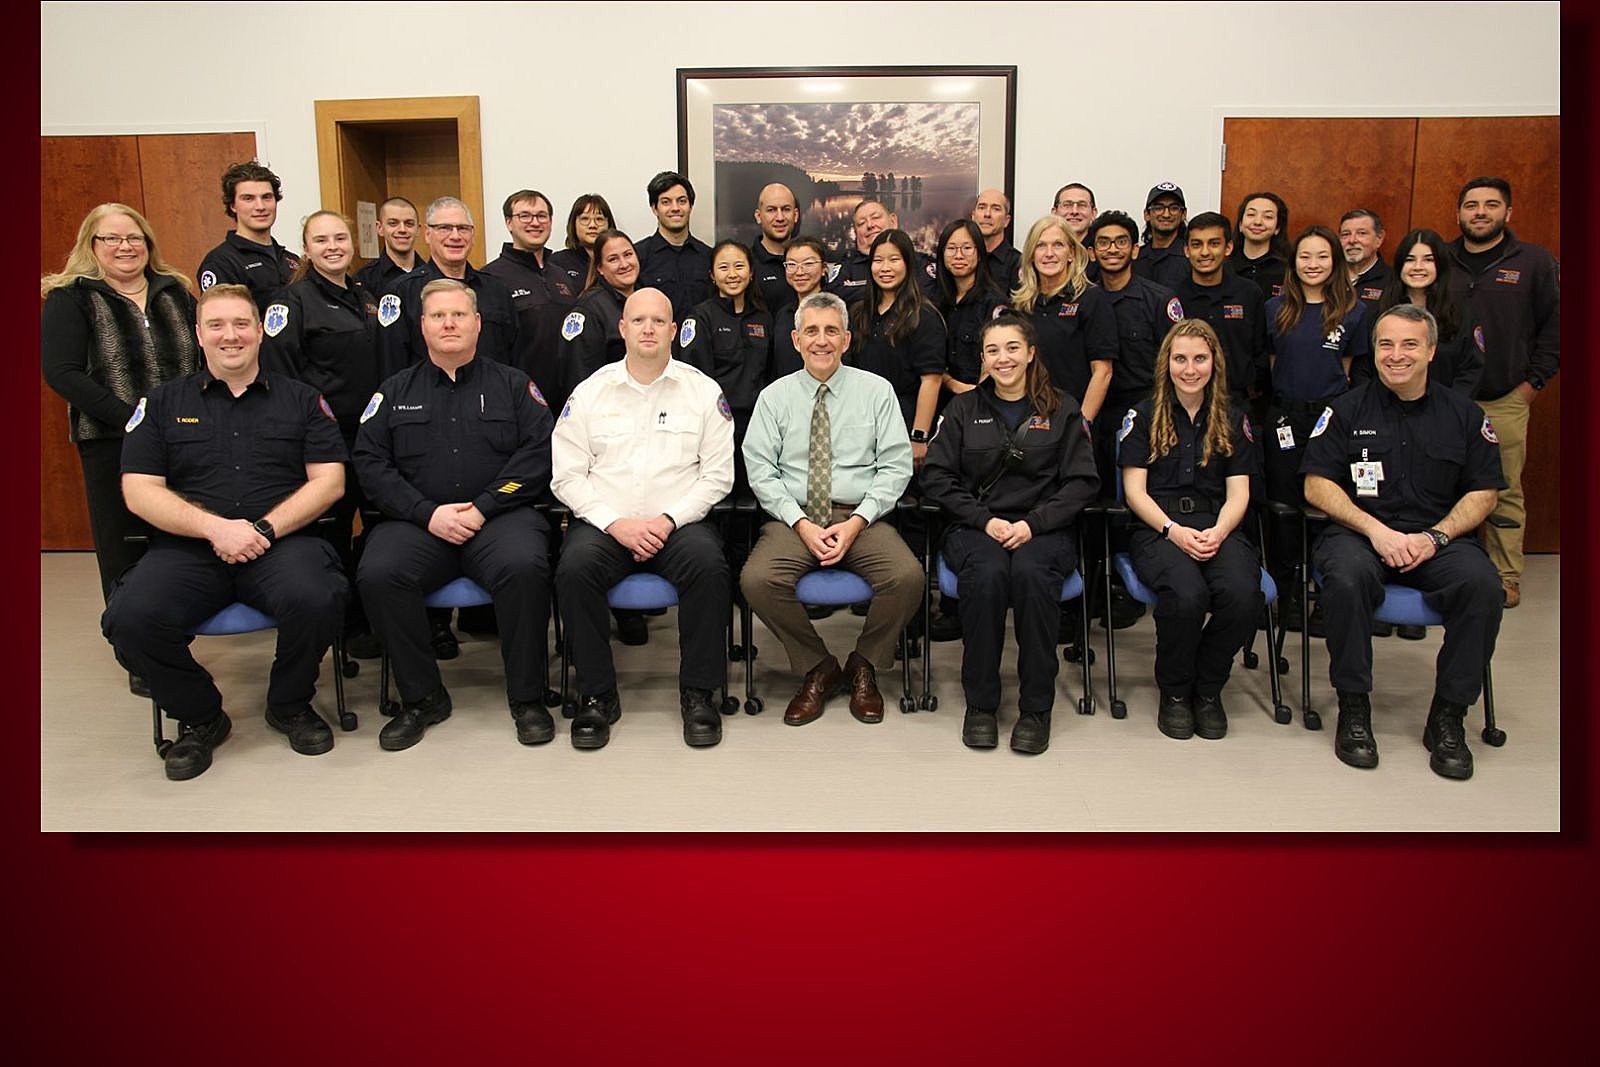 Mayor Mark Freda (front row, center) with the Princeton First Aid & Rescue Squad 